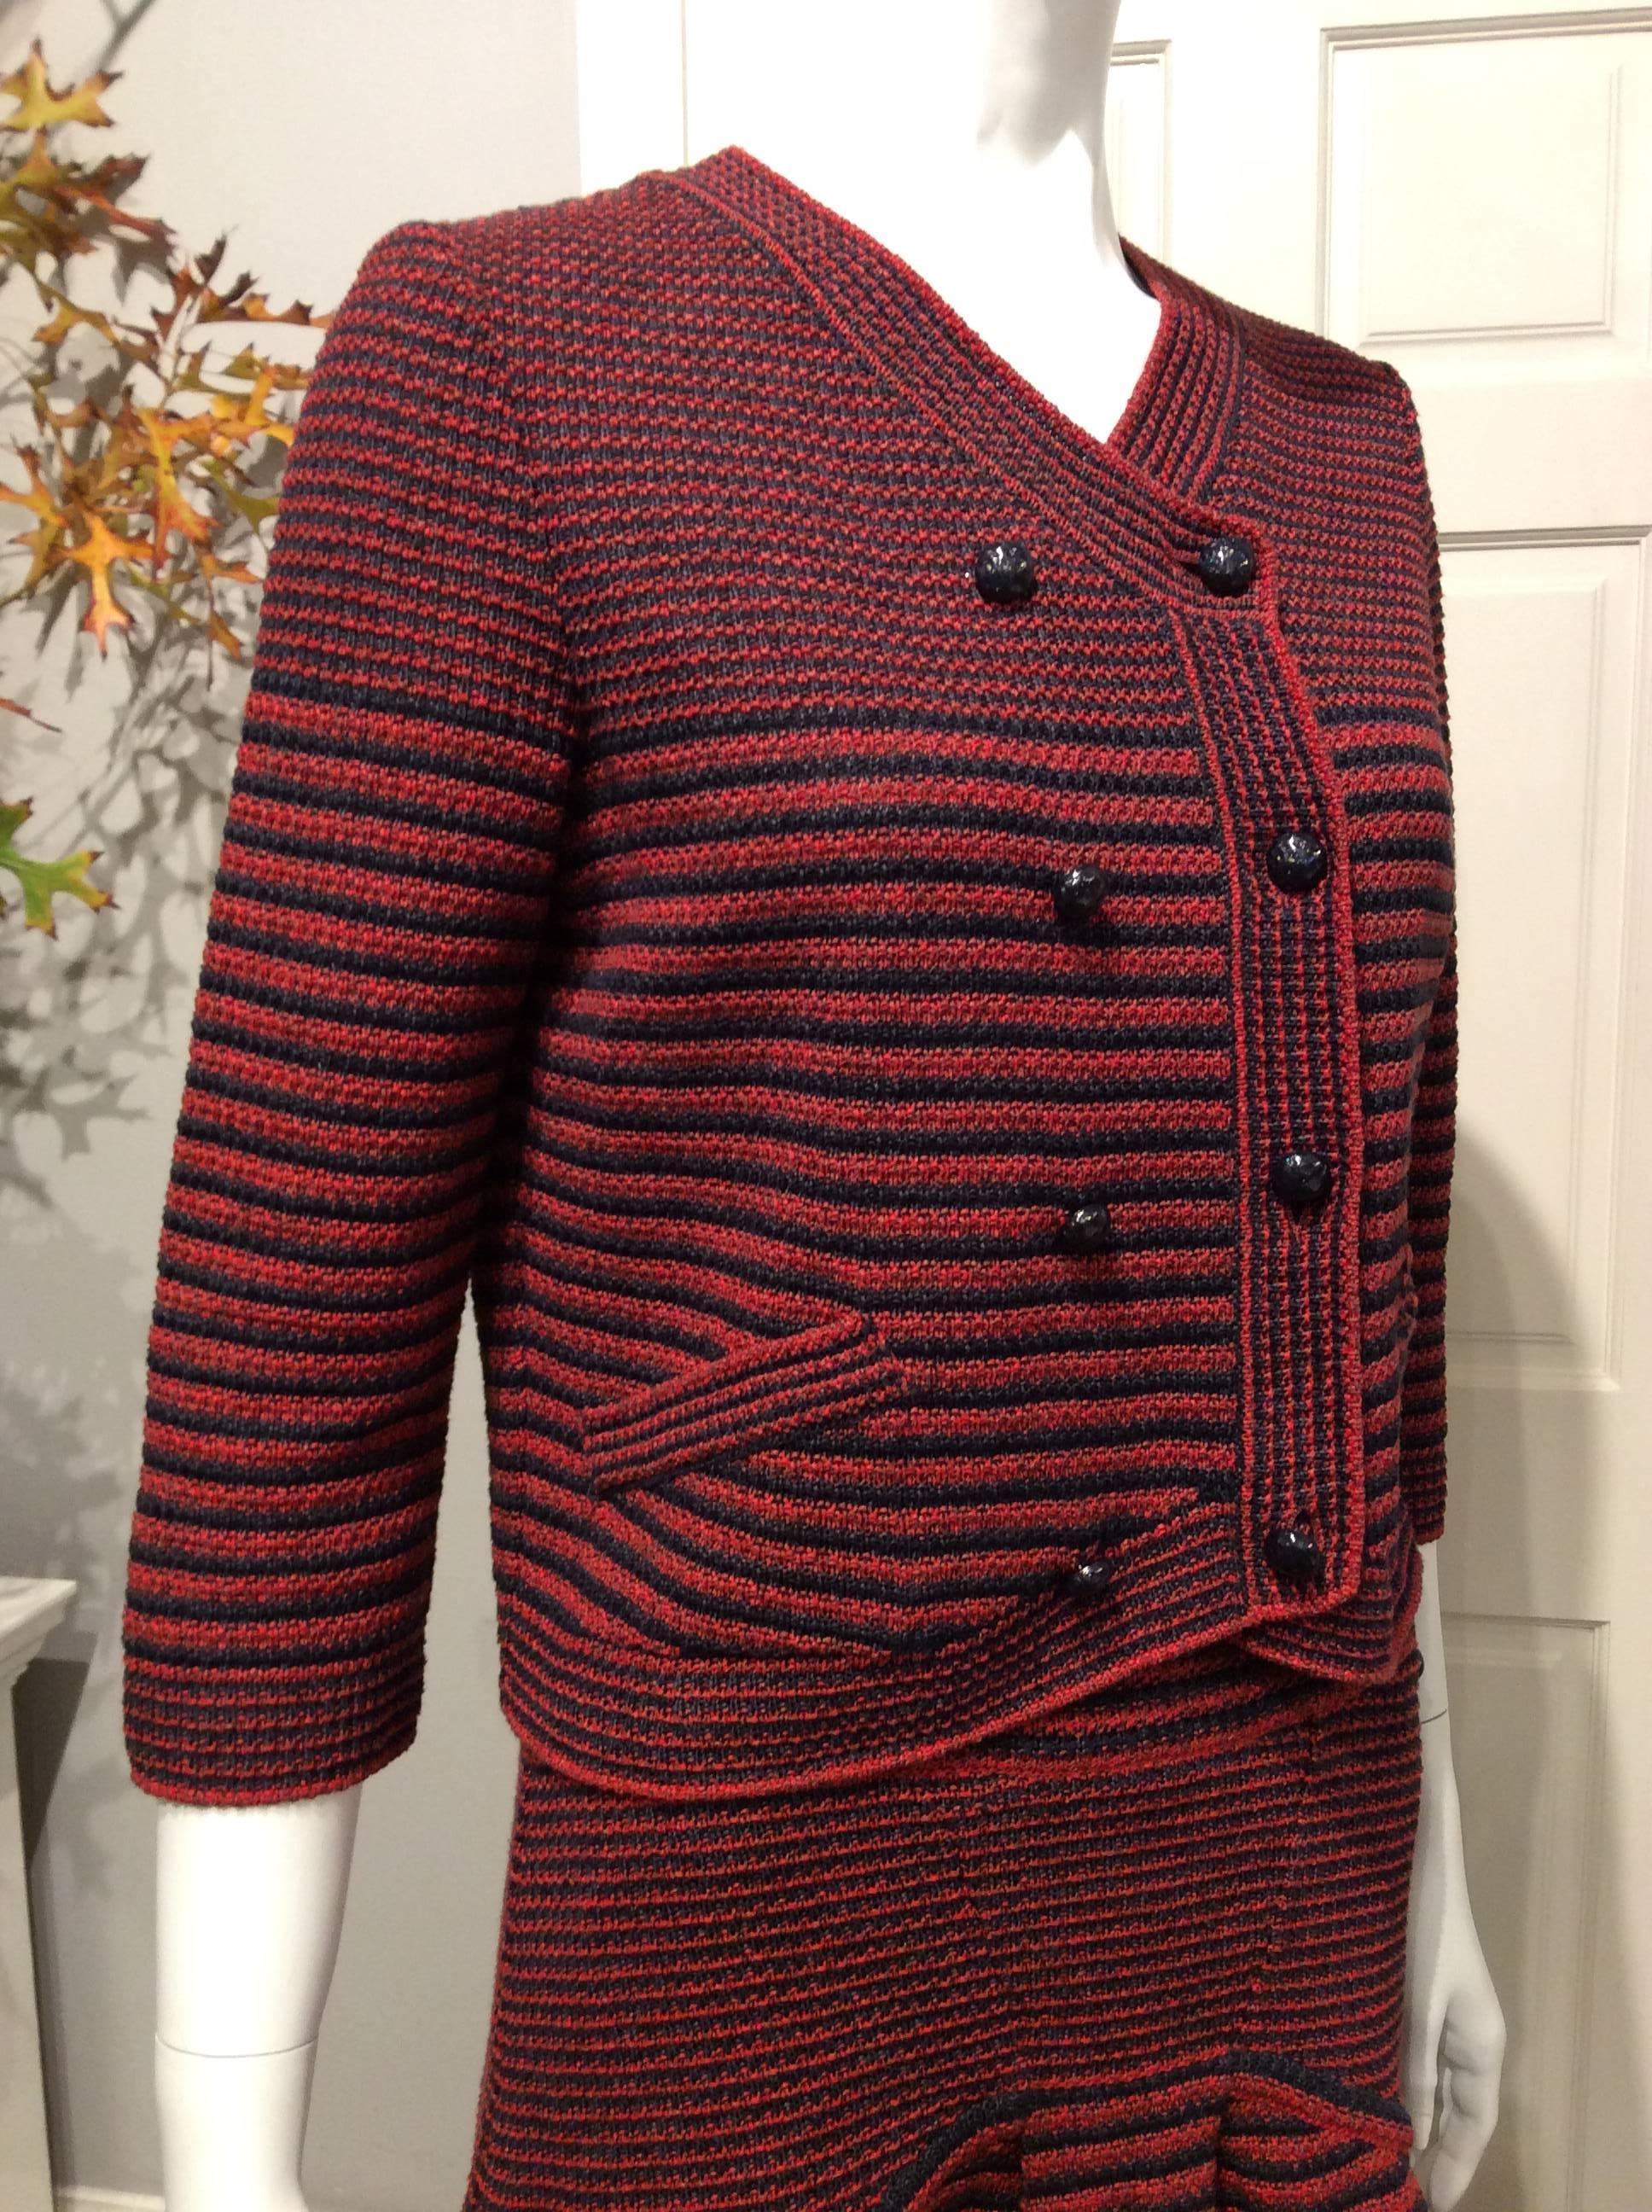 Women's Chanel Knitted Brick-red And Navy Two Piece Skirt Outfit Sz38 (Us4) For Sale